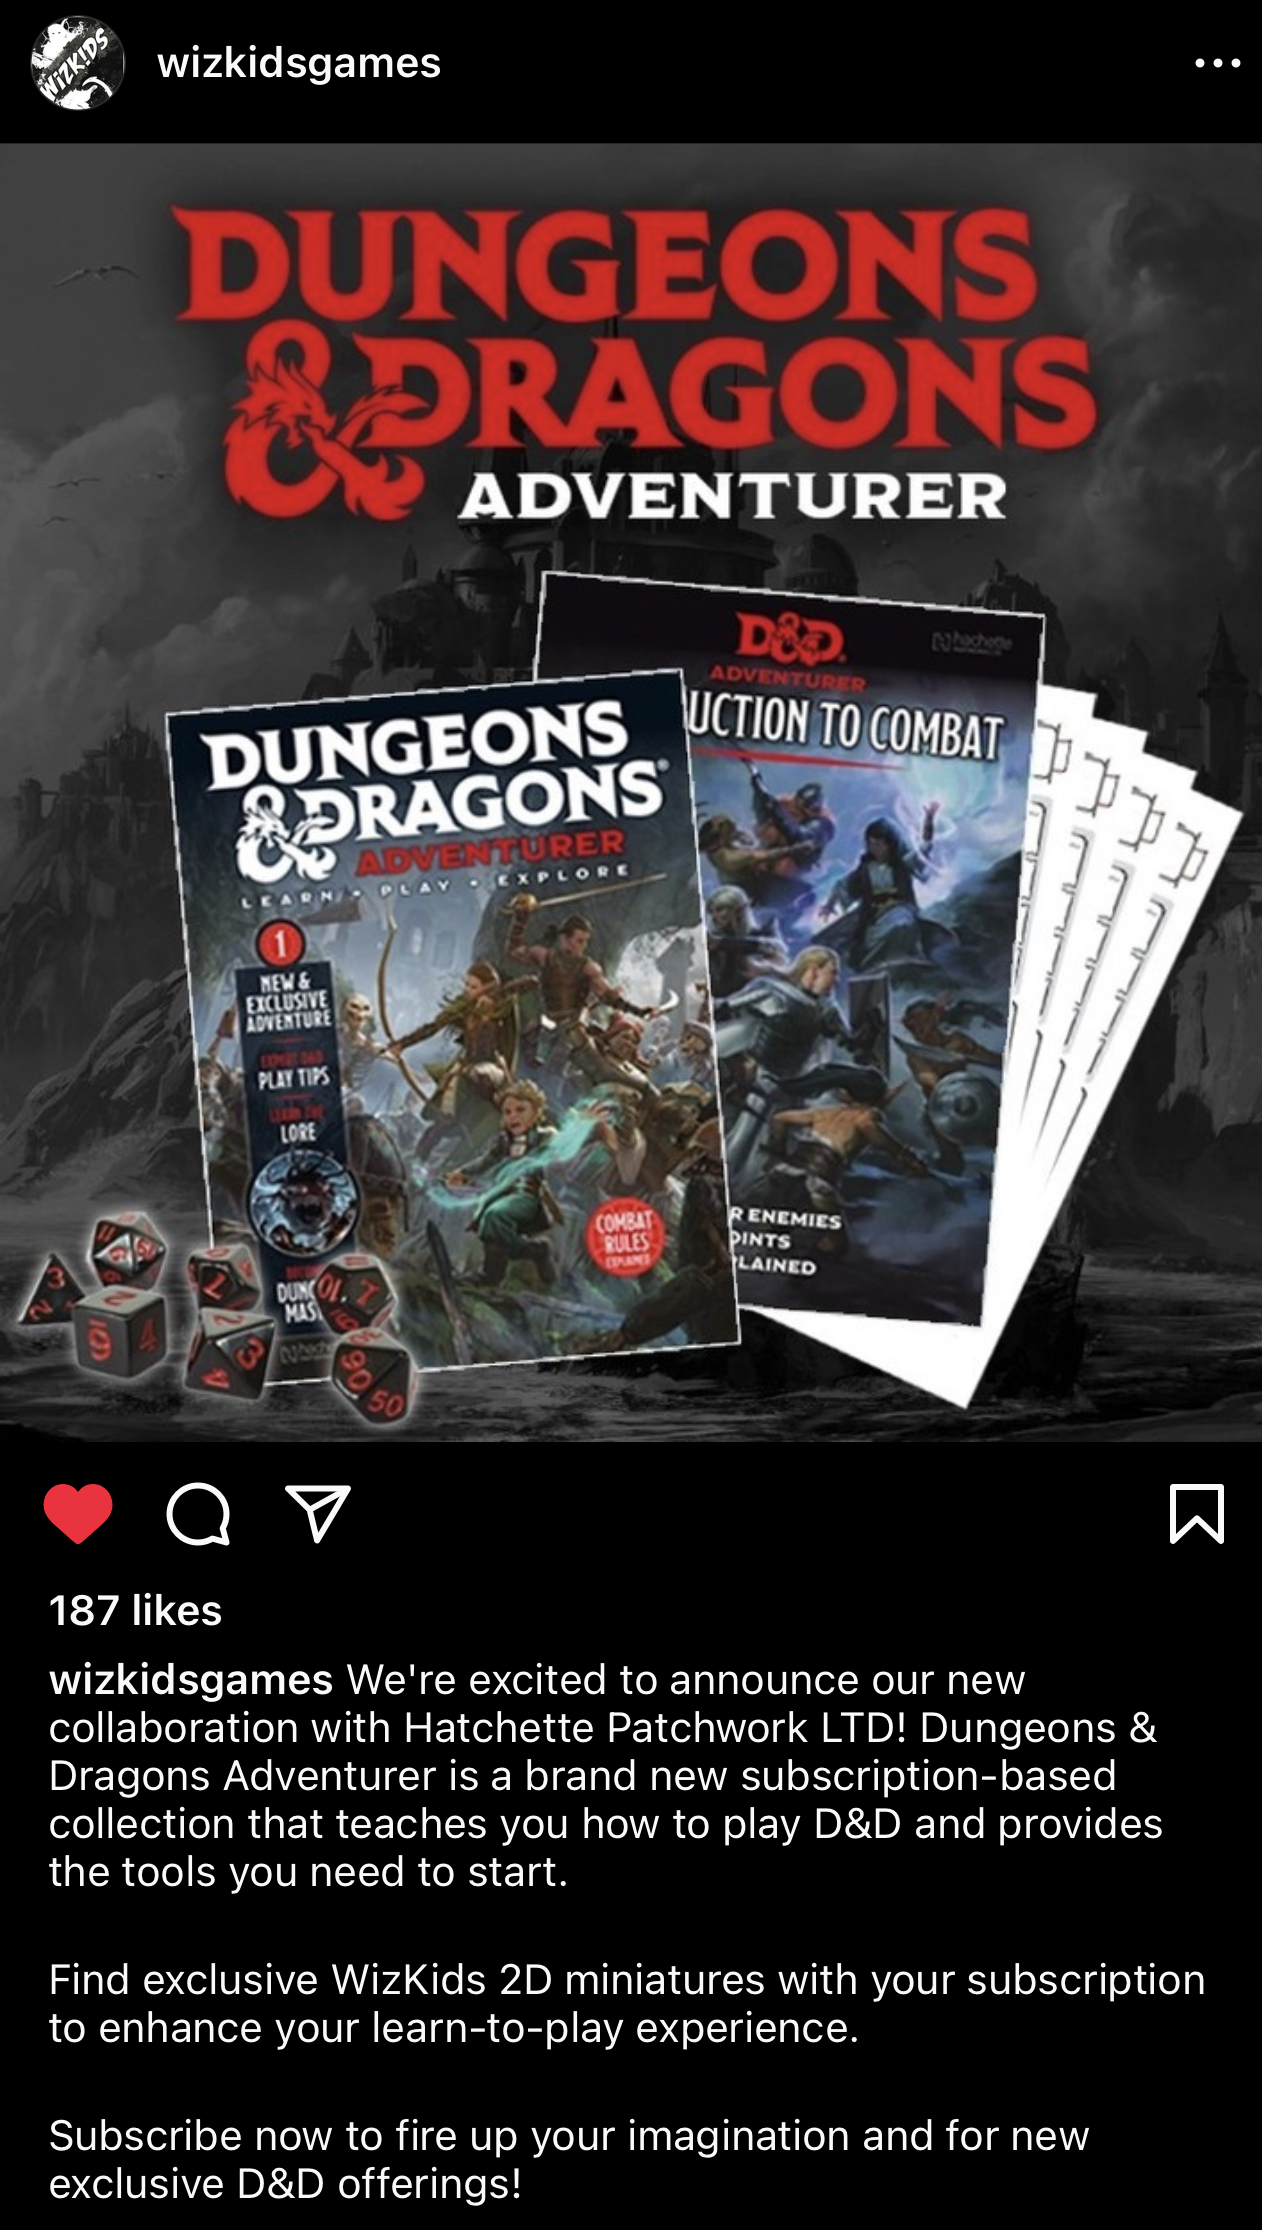 wizkidsgames We're excited to announce our new collaboration with Hatchette Patchwork LTD! Dungeons & Dragons Adventurer is a brand new subscription-based collection that teaches you how to play D&D and provides the tools you need to start. Find exclusive WizKids 2D miniatures with your subscription to enhance your learn-to-play experience.